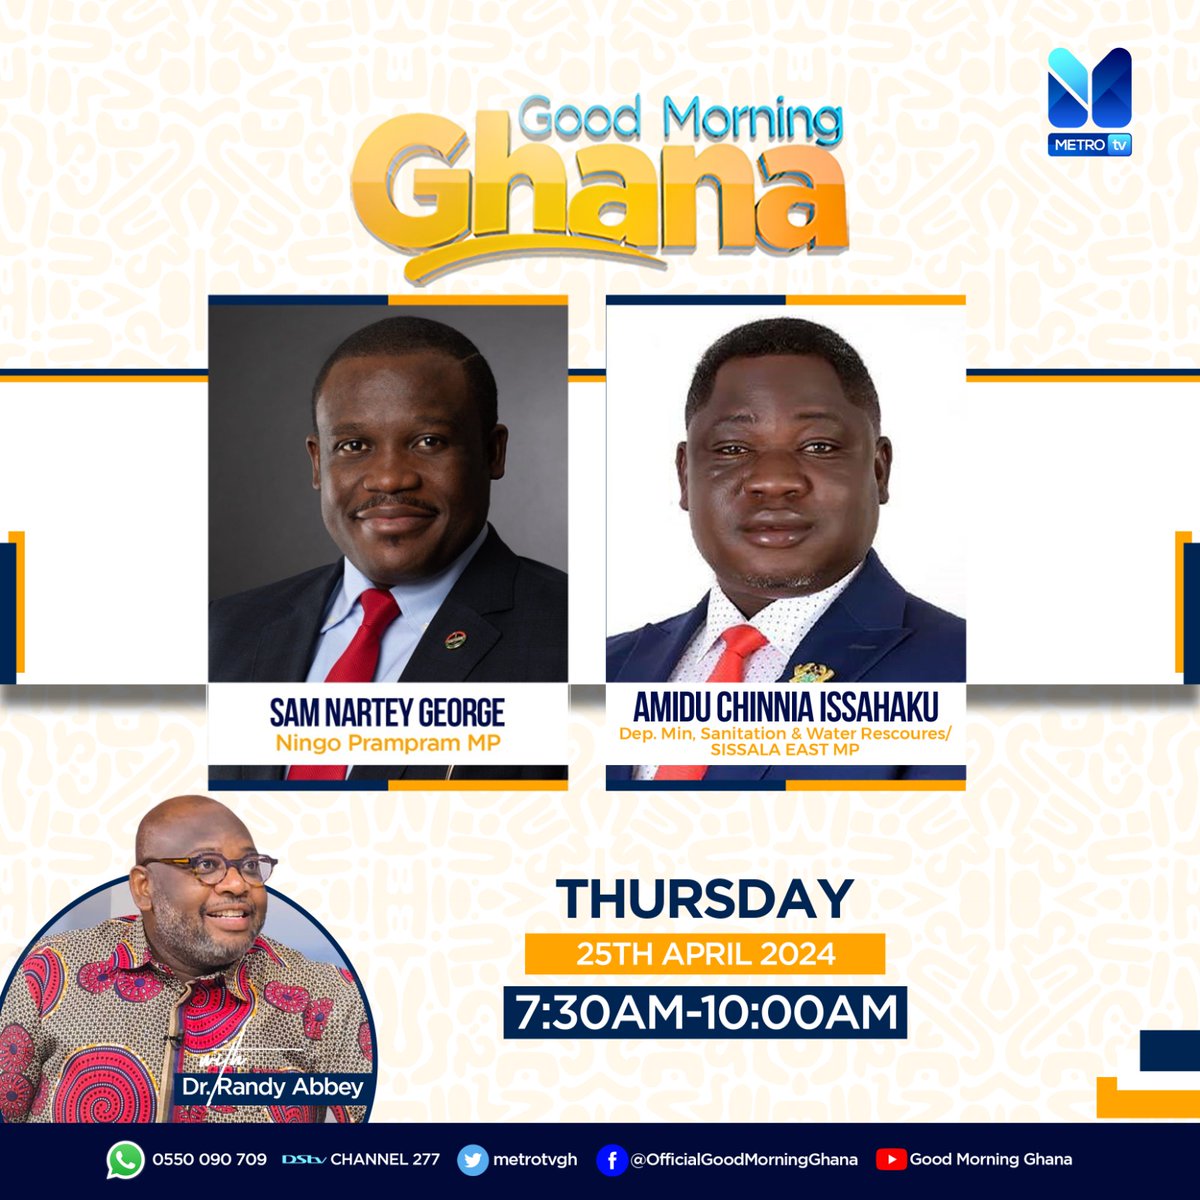 We go live shortly on @metrotvgh. It is #GoodMorningGhana. Let's go! 🦁💪🏾🇬🇭🔥